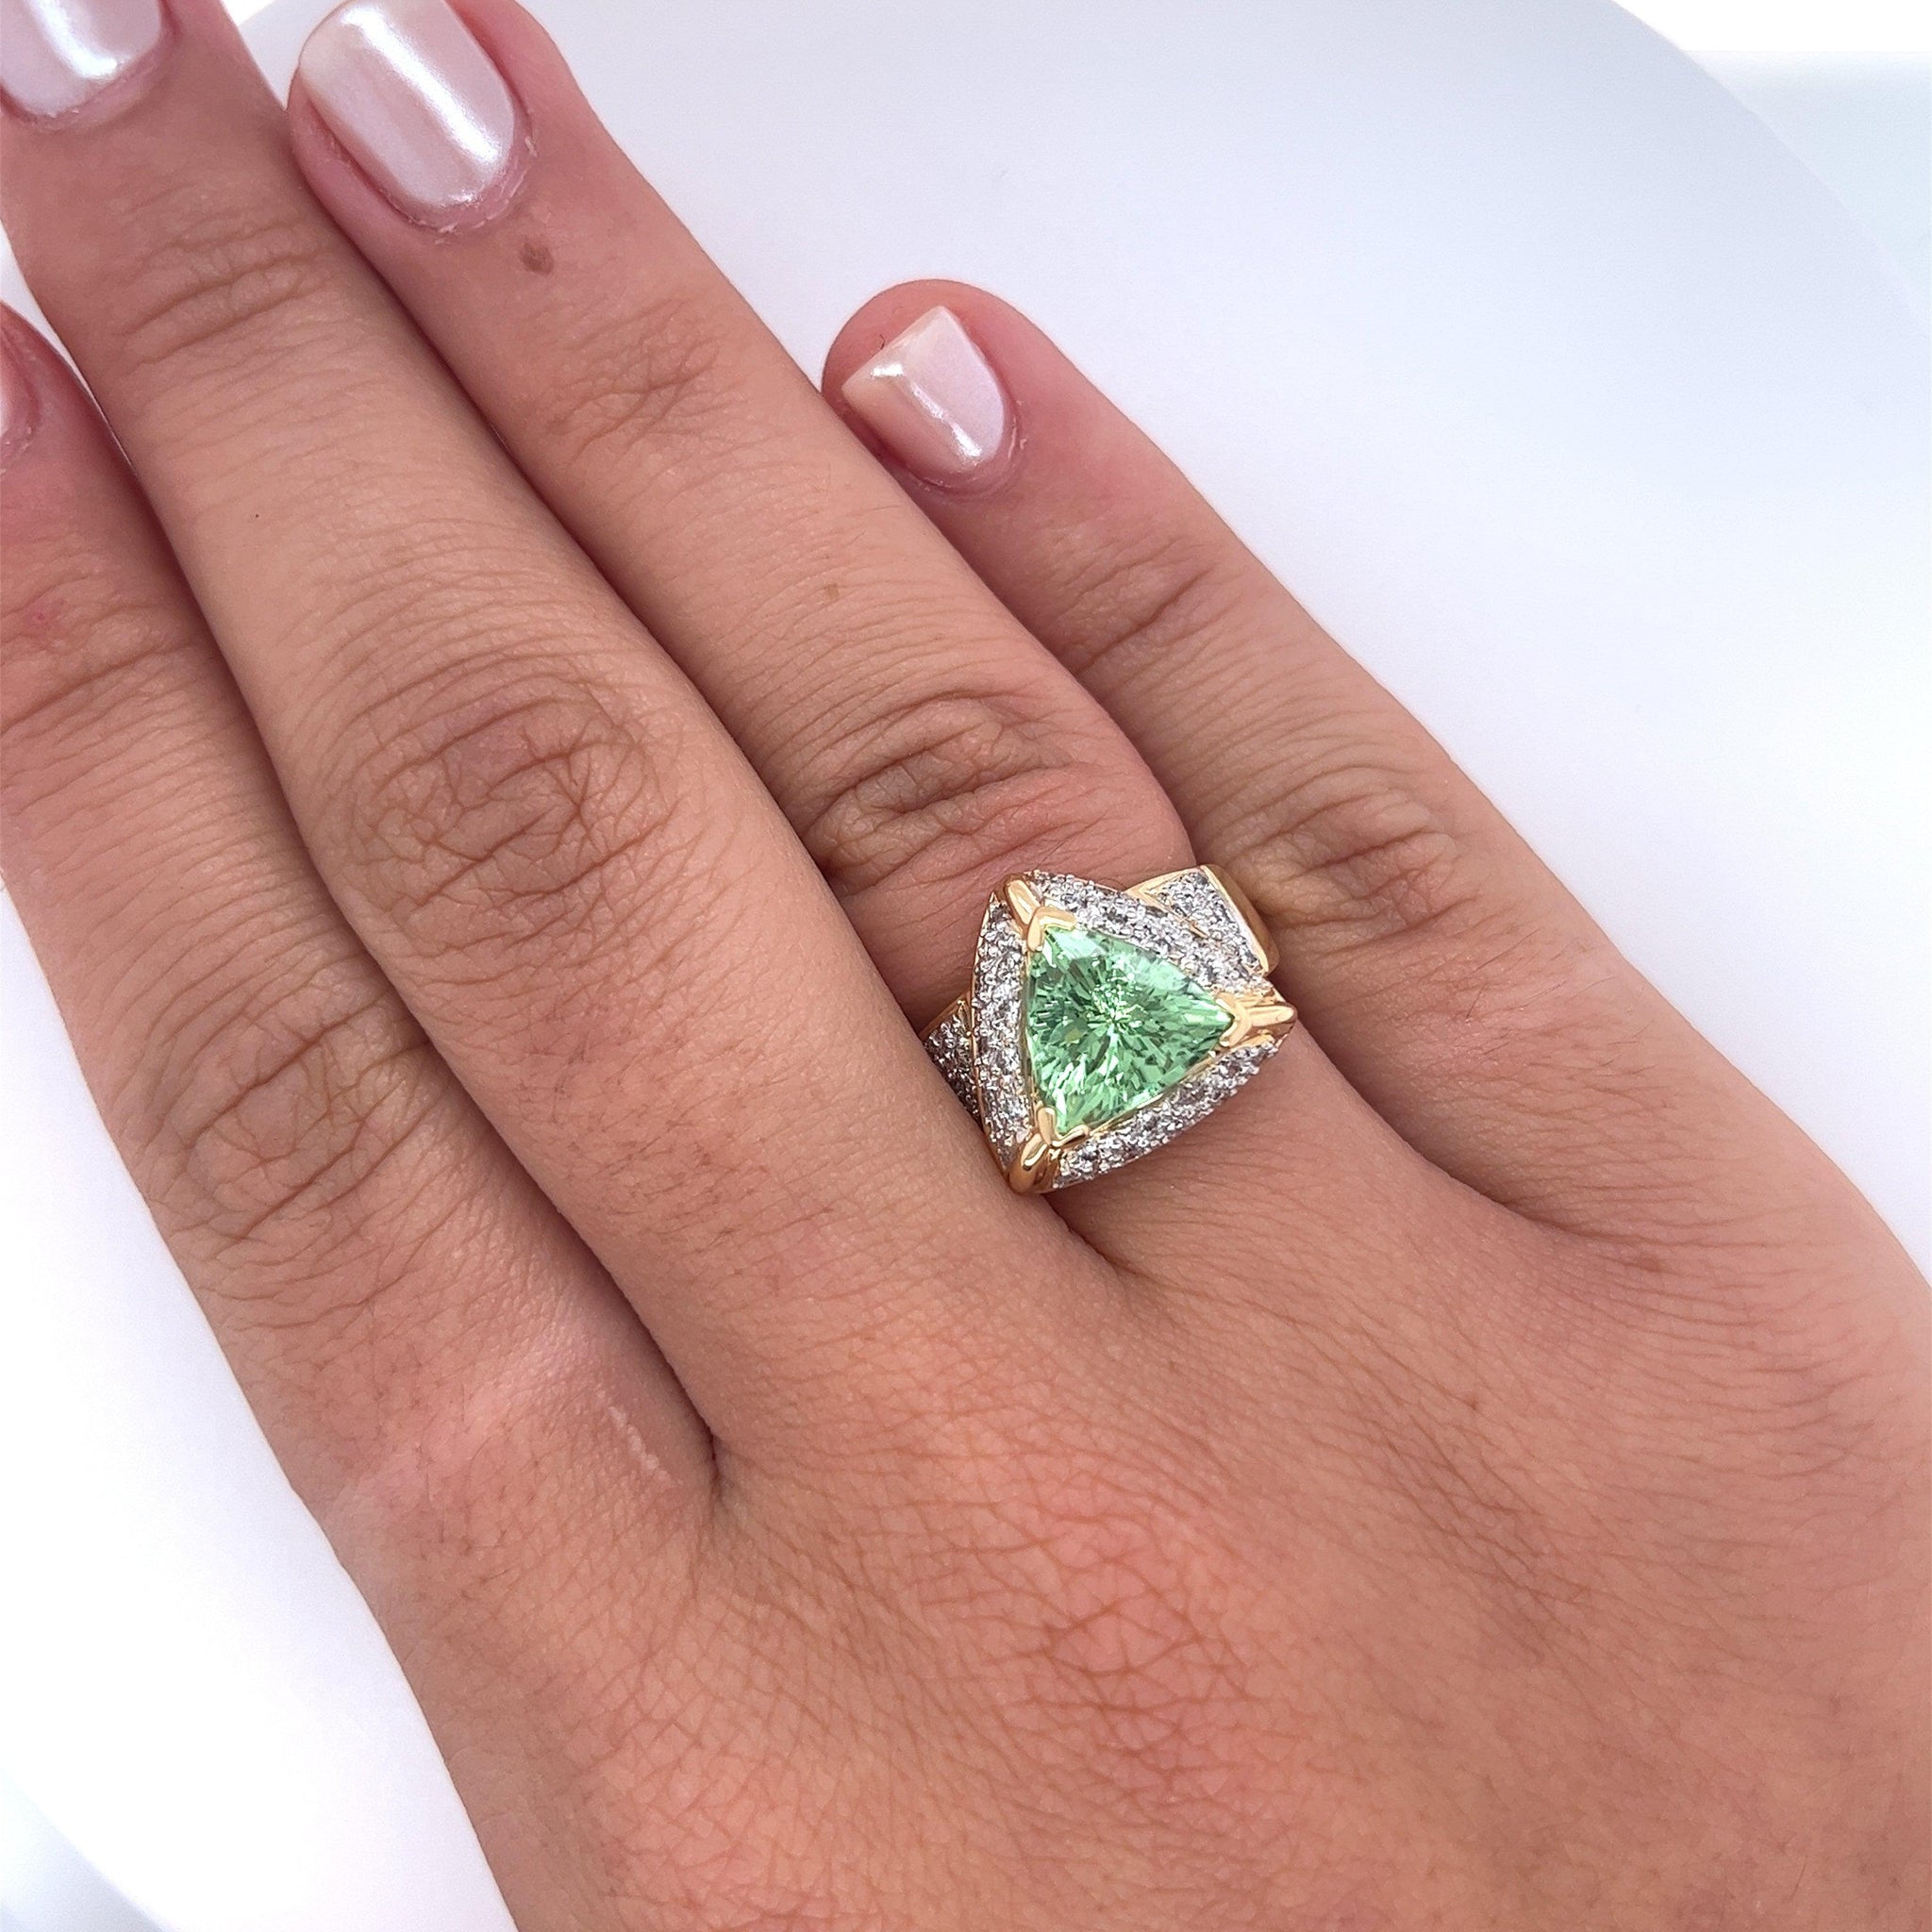 7 Carat Trilliant Cut Watermelon Green Tourmaline with Diamond Sides in 18K Gold 2 Tone Ring